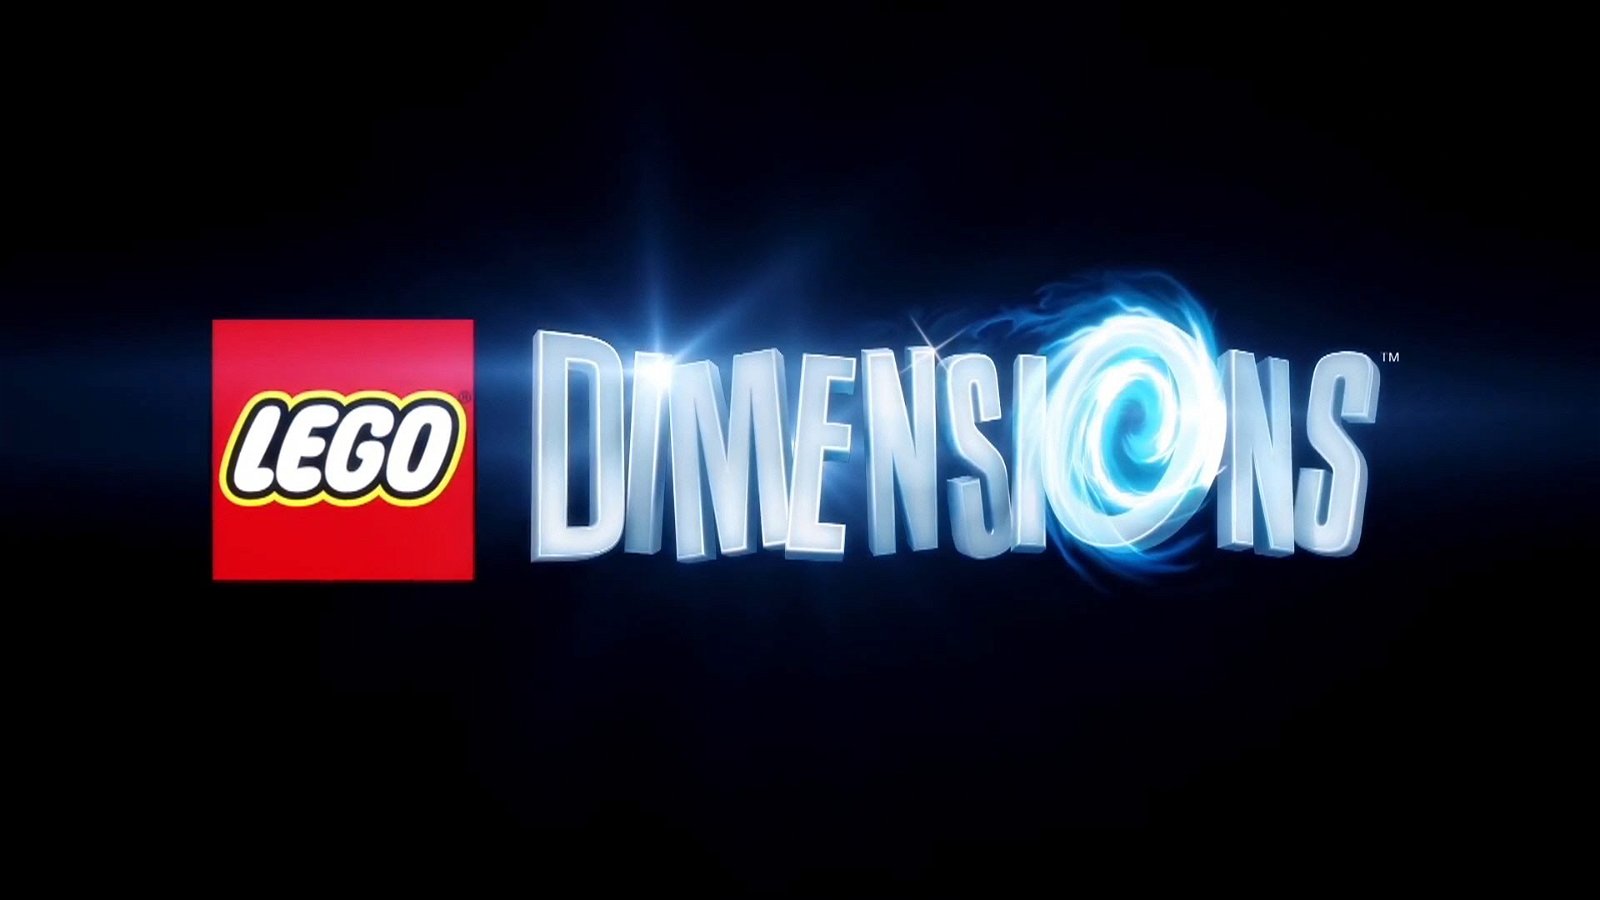 Image of Lego Dimensions